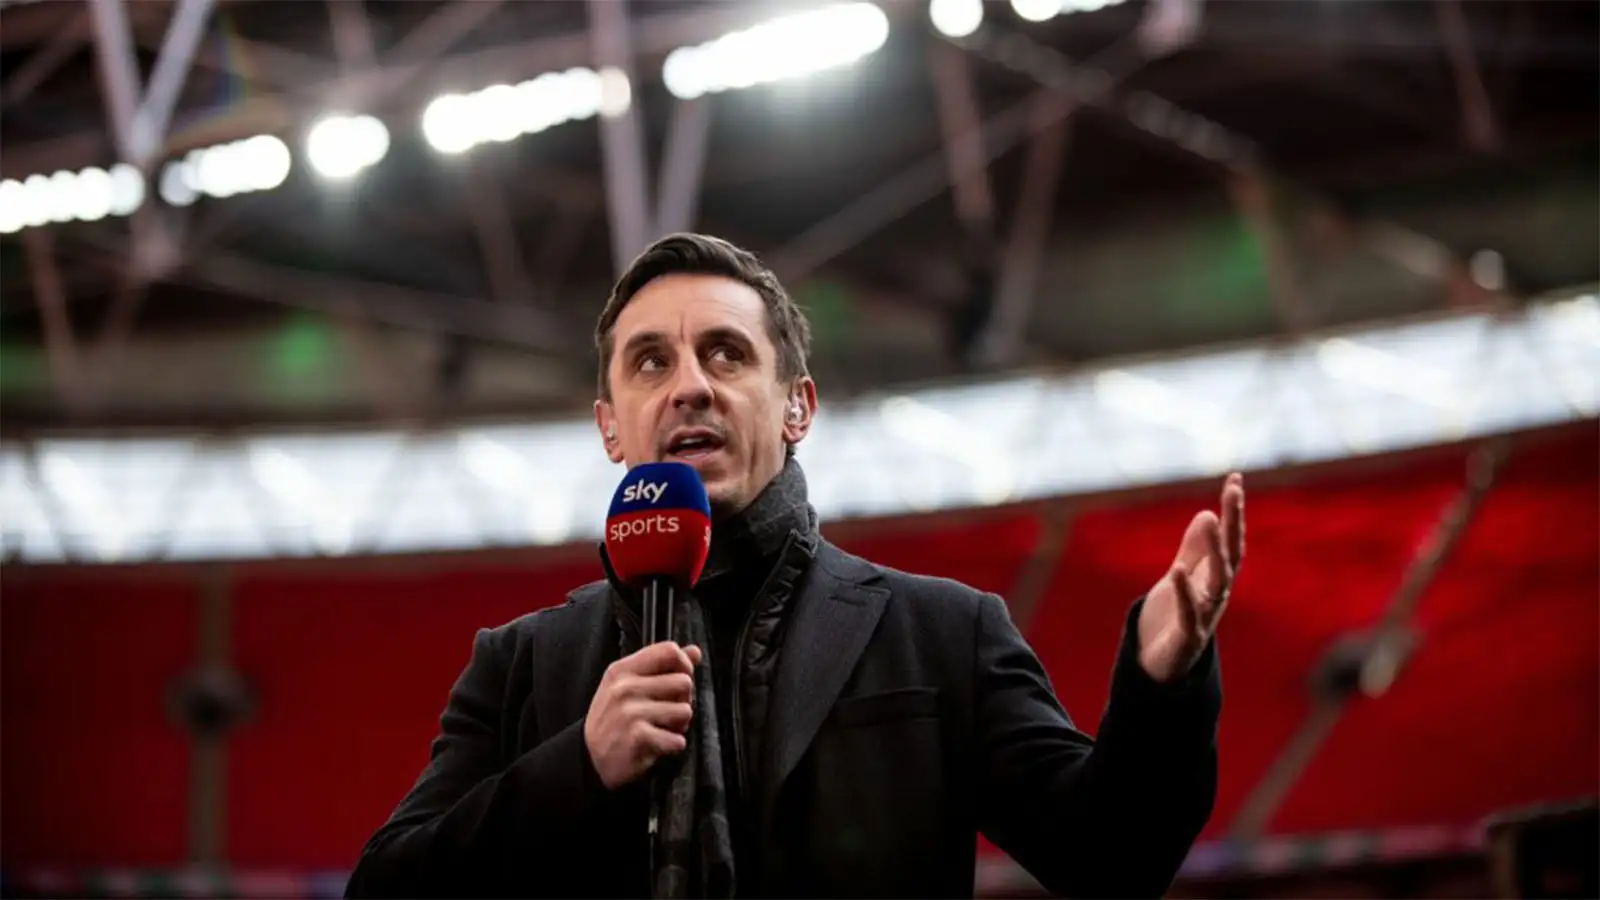 Gary Neville commentating for Sky Sports during a match at Wembley Stadium.